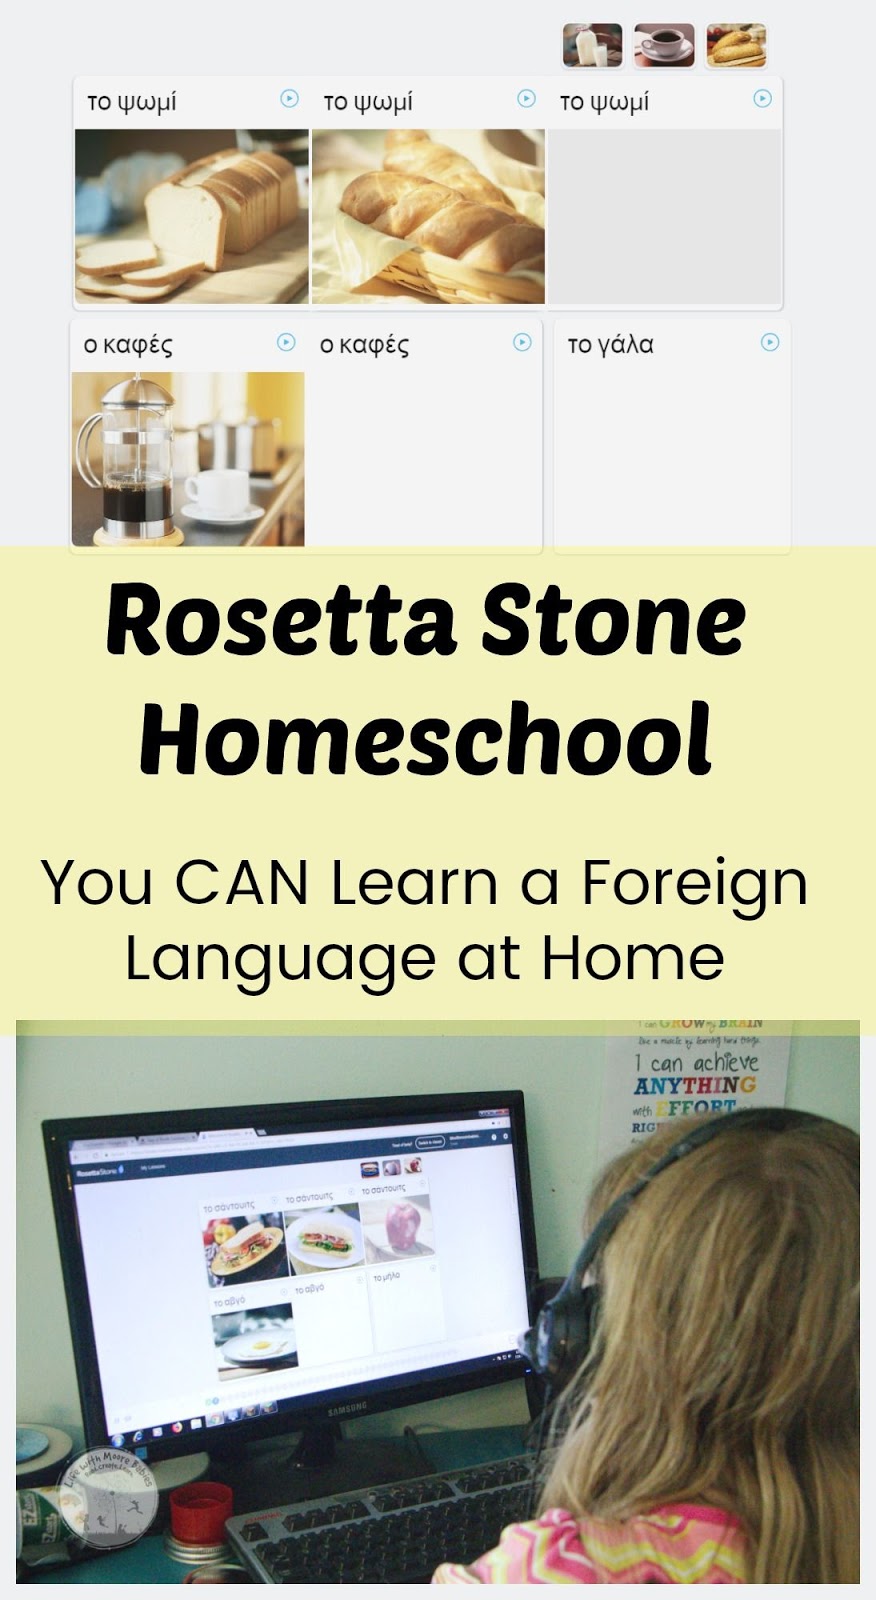 How to Add Foreign Language to Your Homeschool: Hint Rosetta Stone 